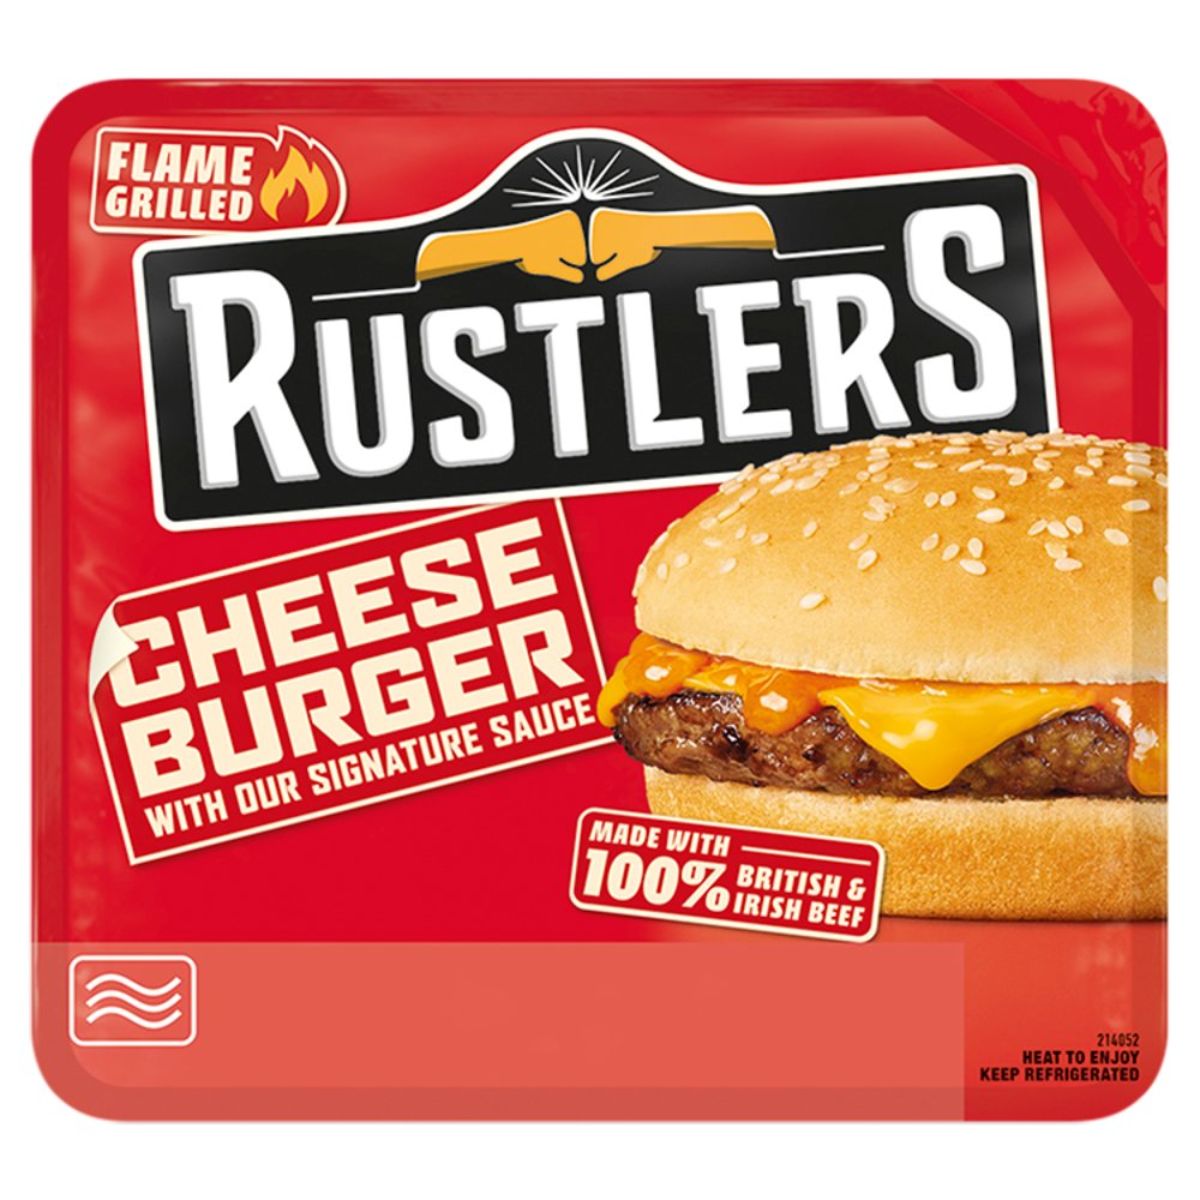 Packaging for Rustlers - Flame Grilled Cheese Burger - 132g featuring a close-up image of the burger on a red background with logos and text.